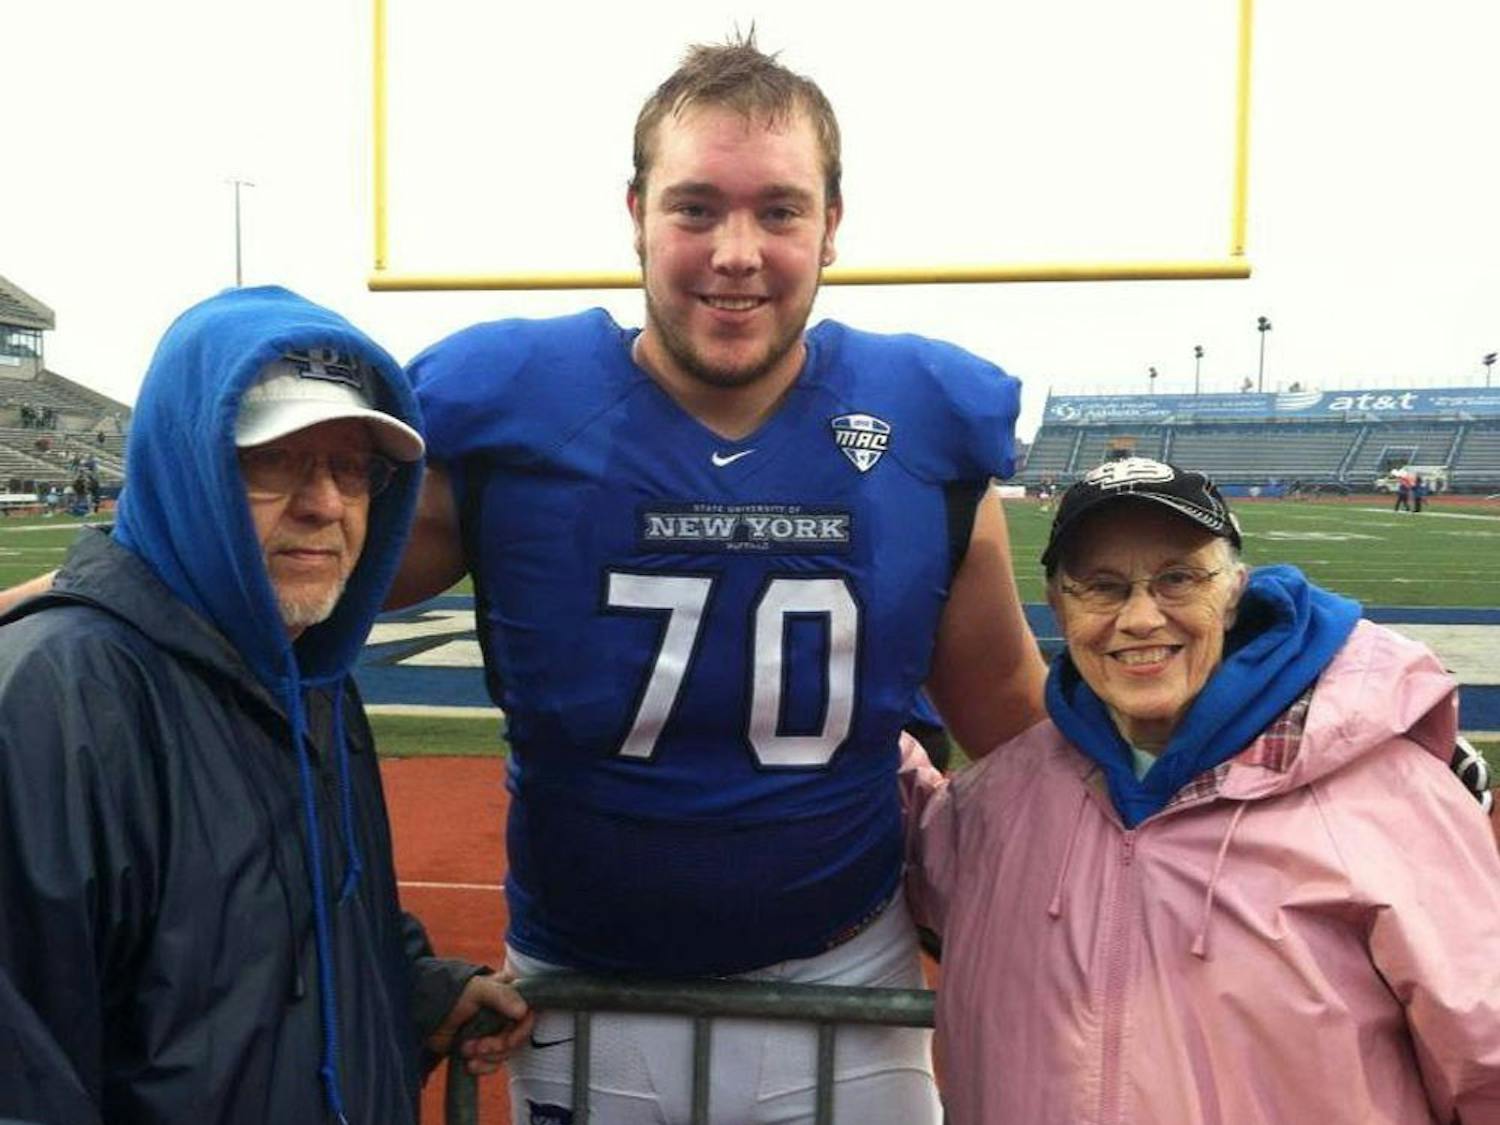 Former Bull John Kling poses for a photo. Kling recently signed with the Washington Redskins.